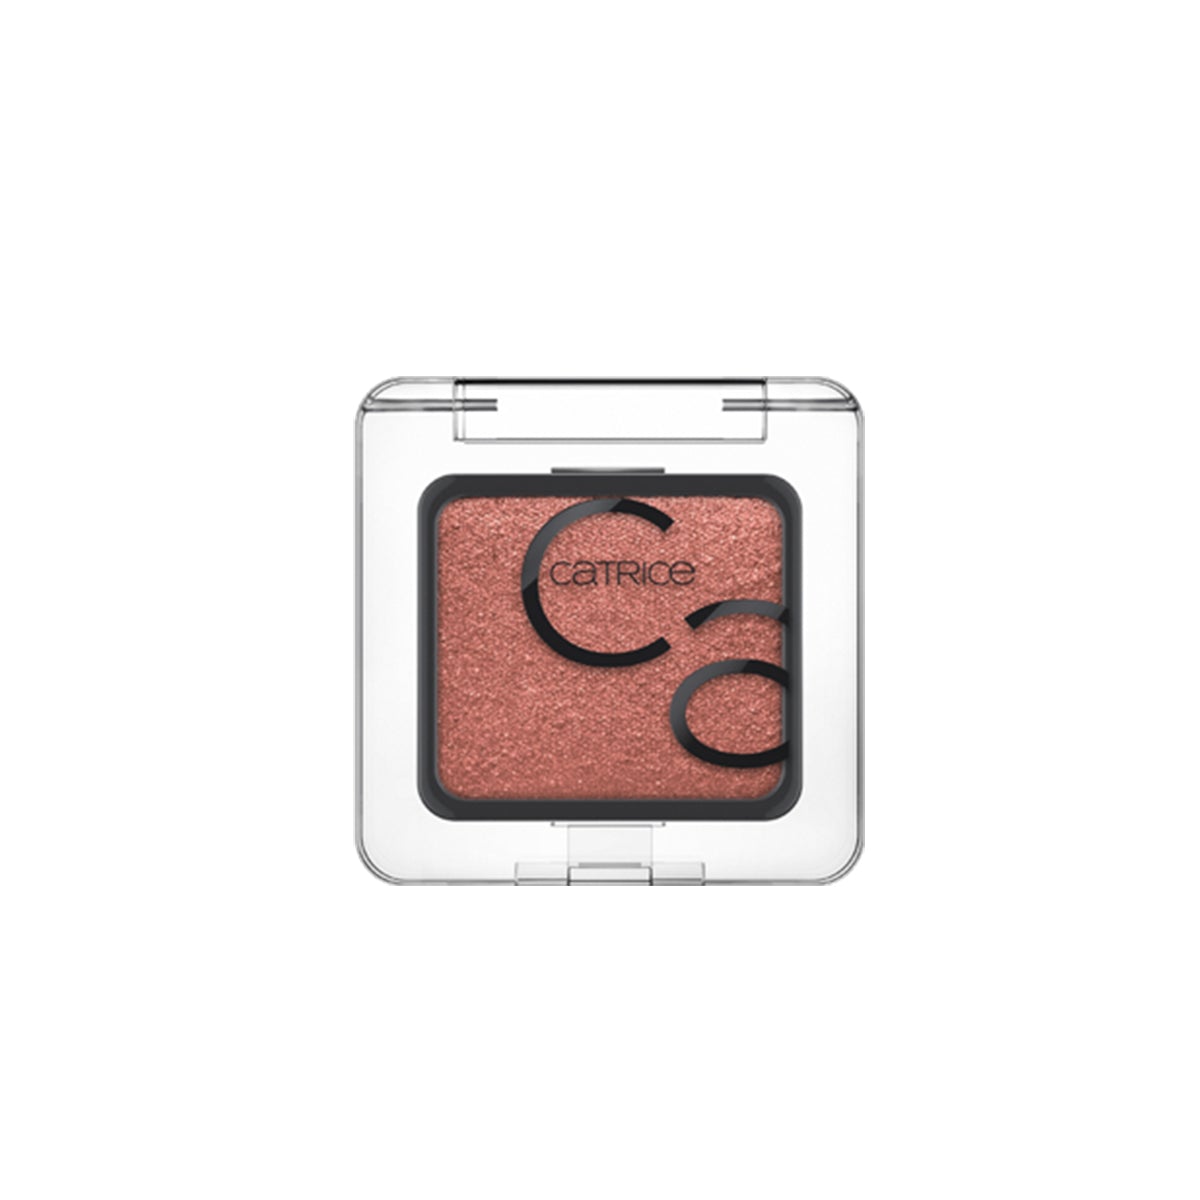 ART COULEURS EYESHADOWS 240 STAND OUT WITH RUSTY - CATRICE